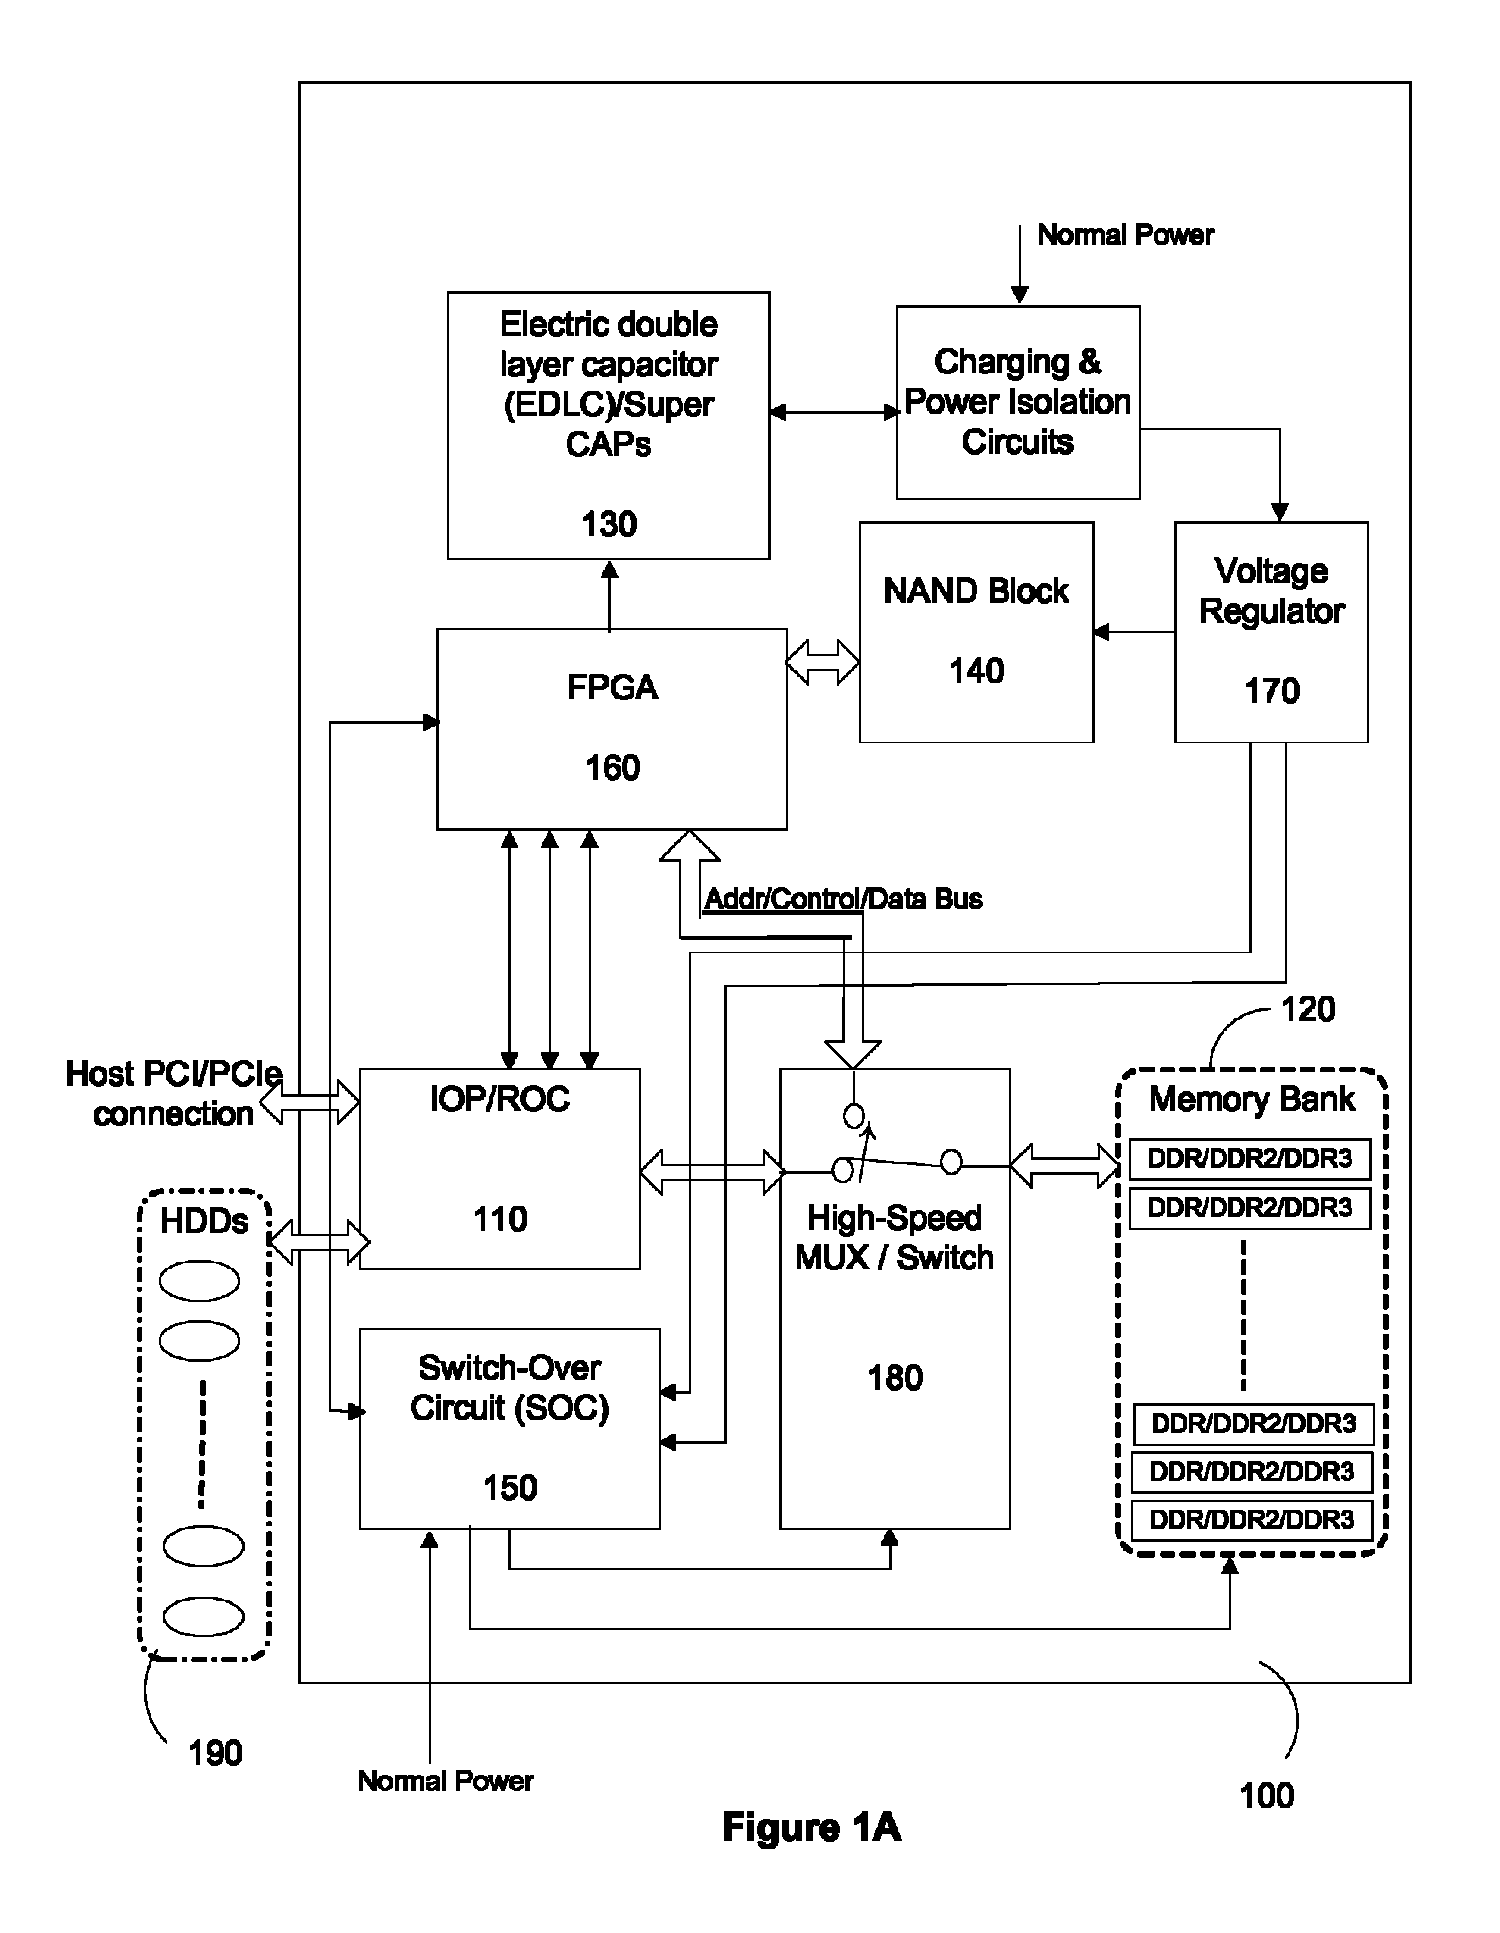 Method and apparatus for archiving data during unexpected power loss